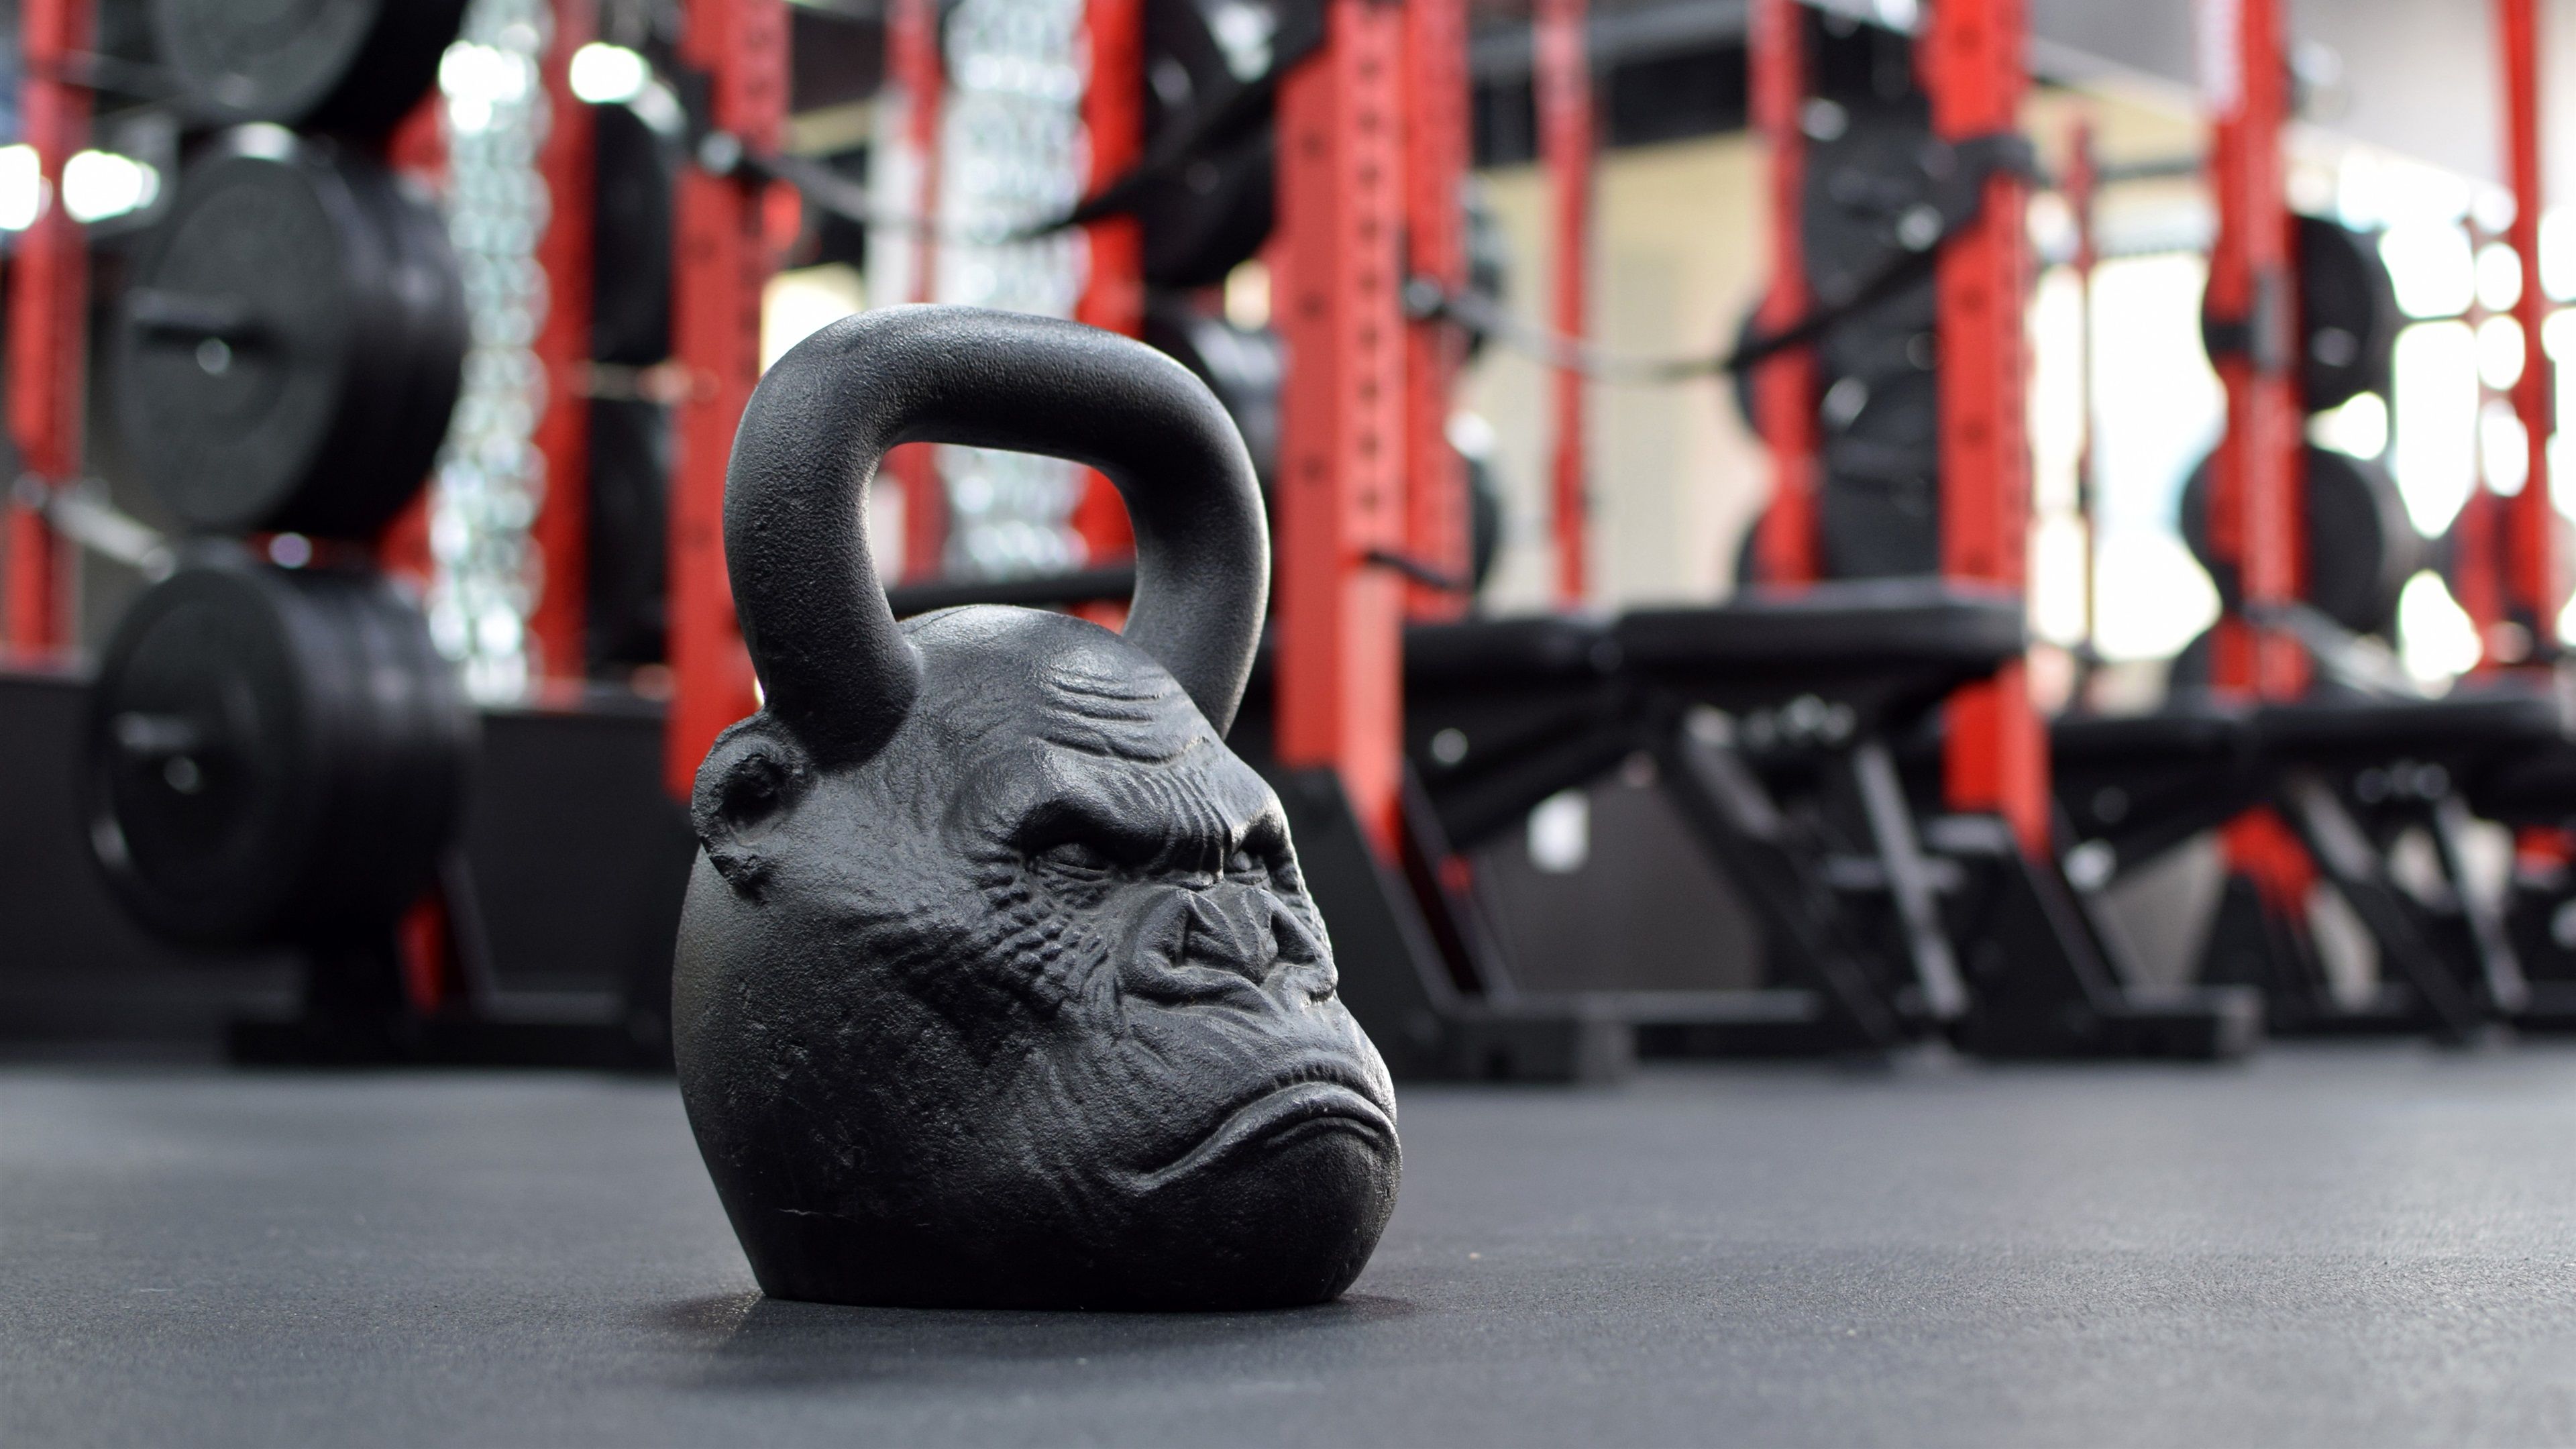 Wallpaper Monkey head dumbbell, gym 3840x2160 UHD 4K Picture, Image